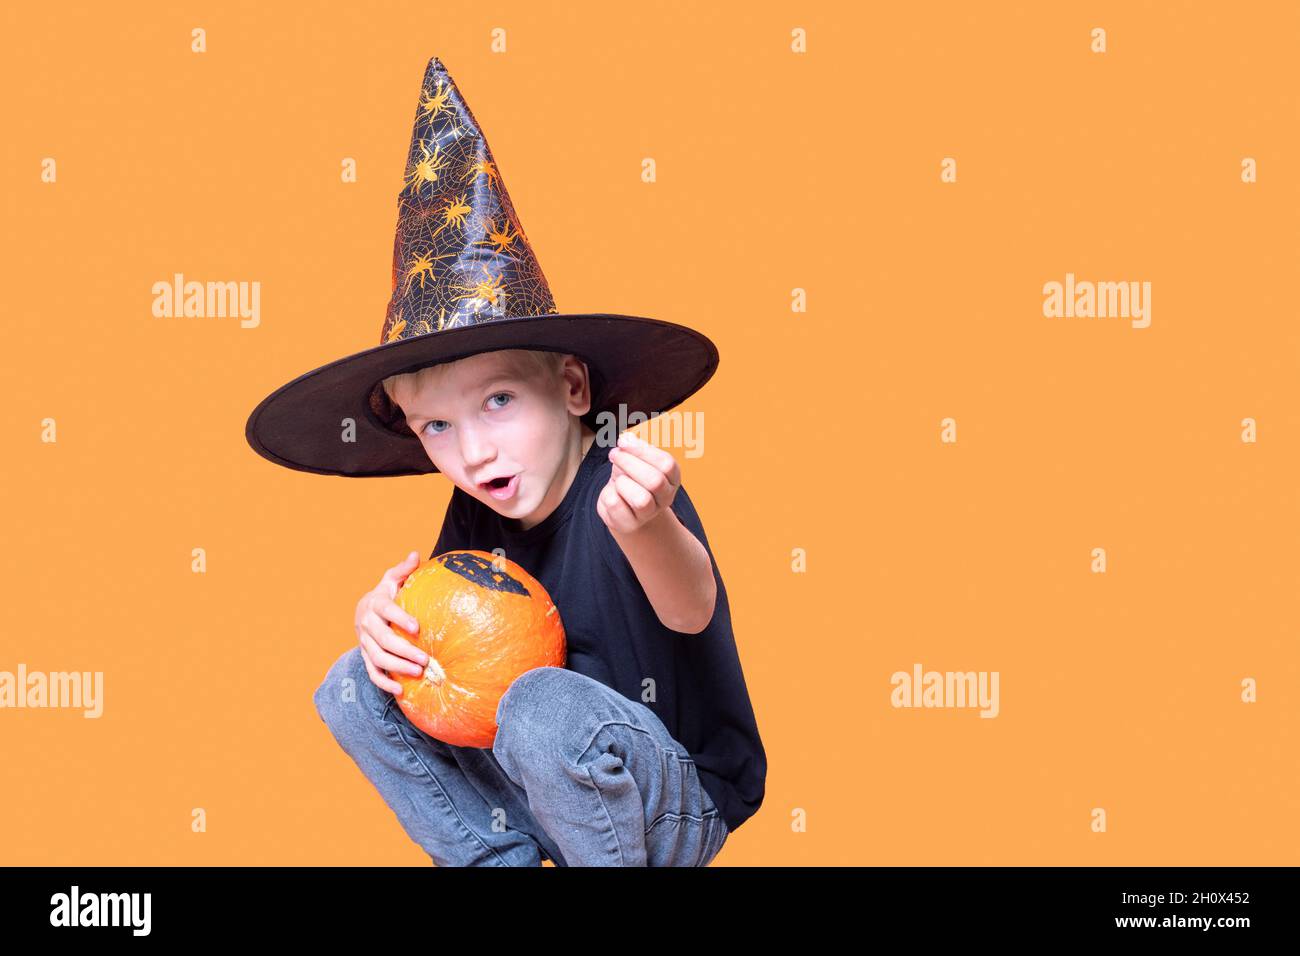 Halloween kids. Little Emotional boy in a wizard hat holding an orange pumpkin in his hands and showing a candy on an orange background. The kid wants Stock Photo